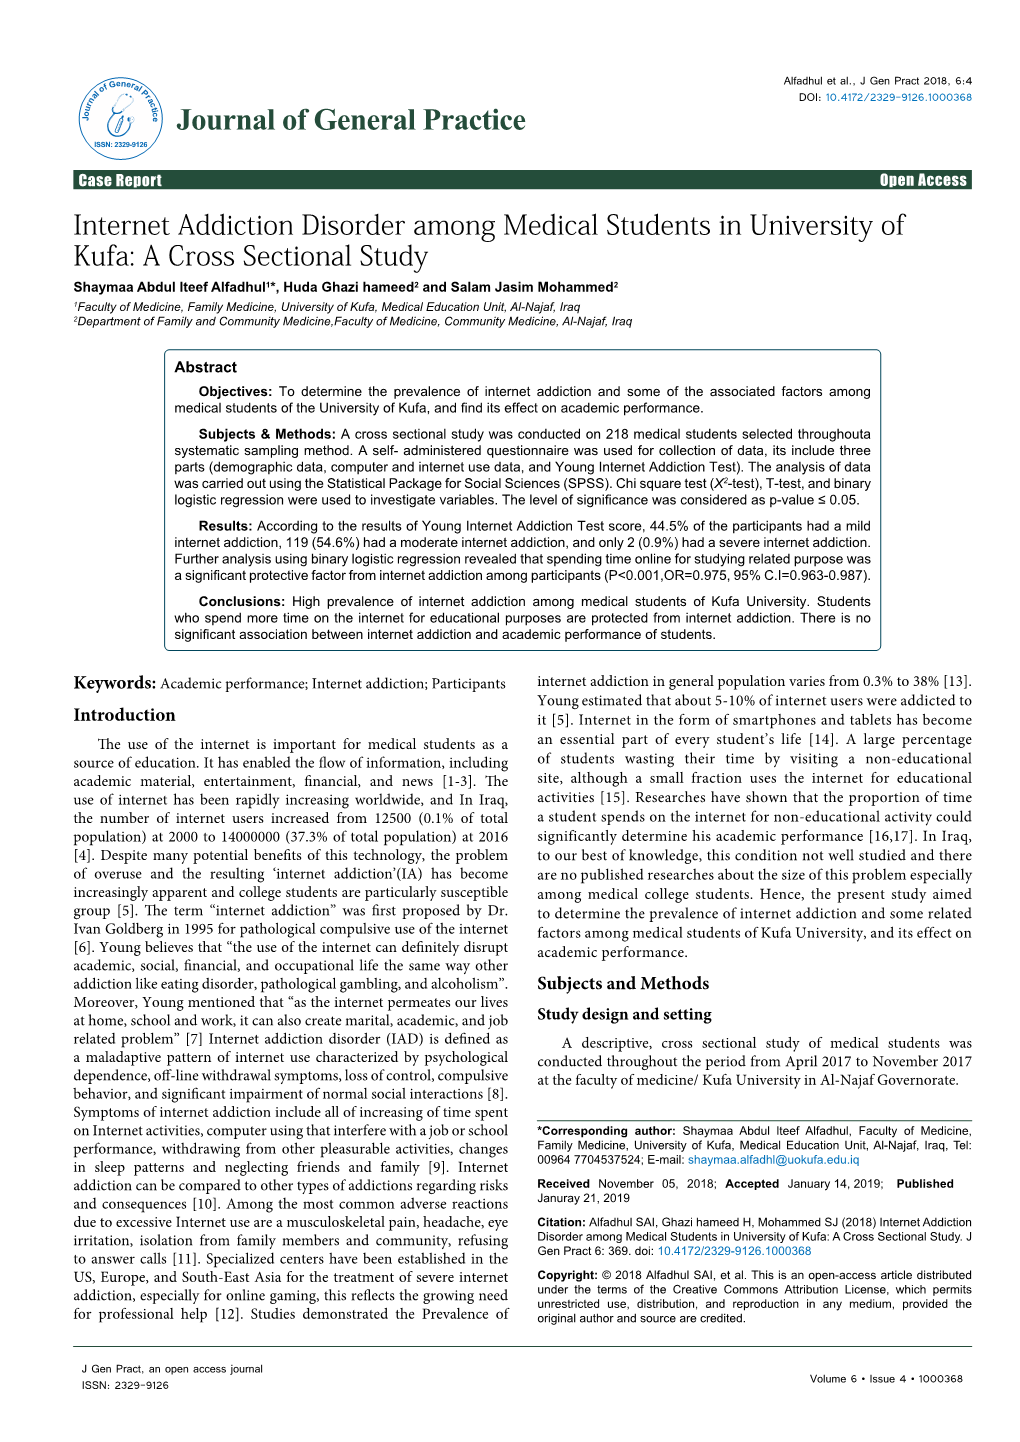 Internet Addiction Disorder Among Medical Students in University of Kufa: a Cross Sectional Study